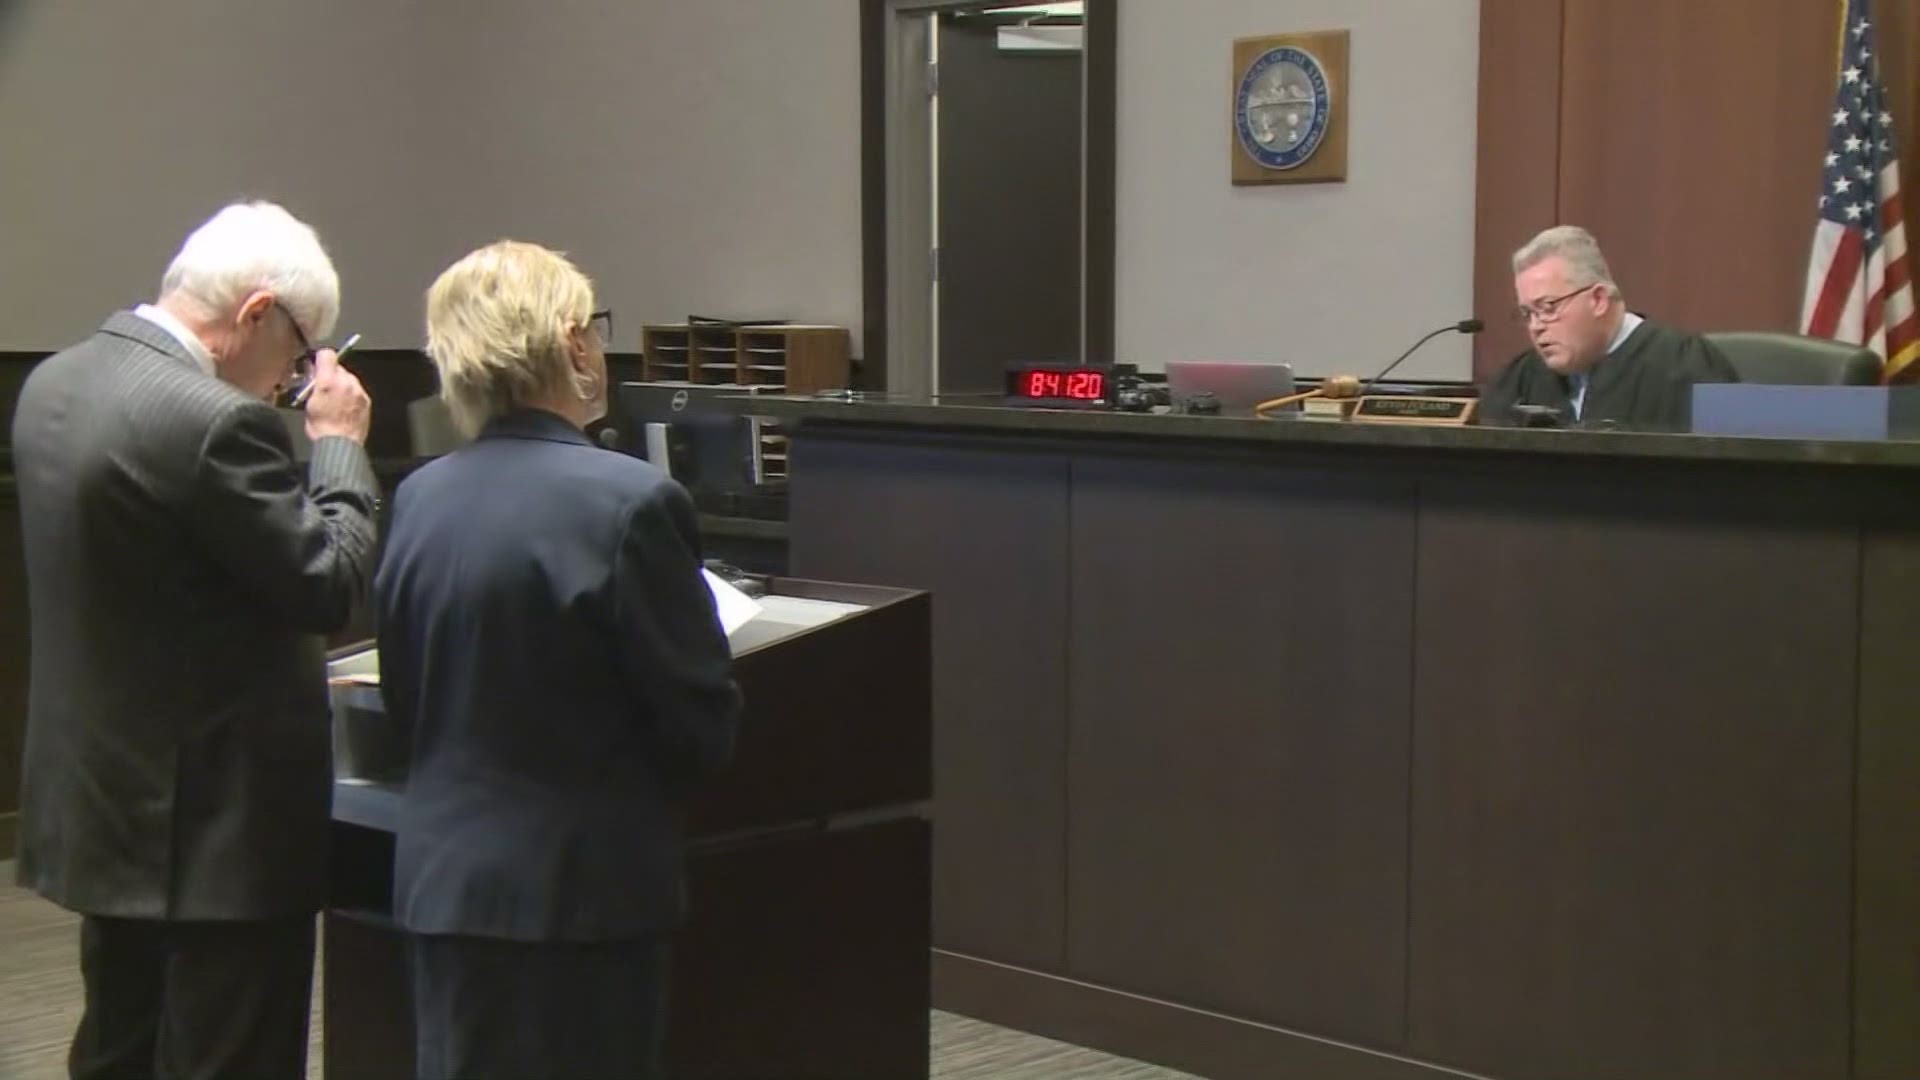 Feb. 15, 2019: Portage County Judge Becky Doherty pleaded guilty to OVI on Friday in which she said, 'I did make a serious error in judgment.'